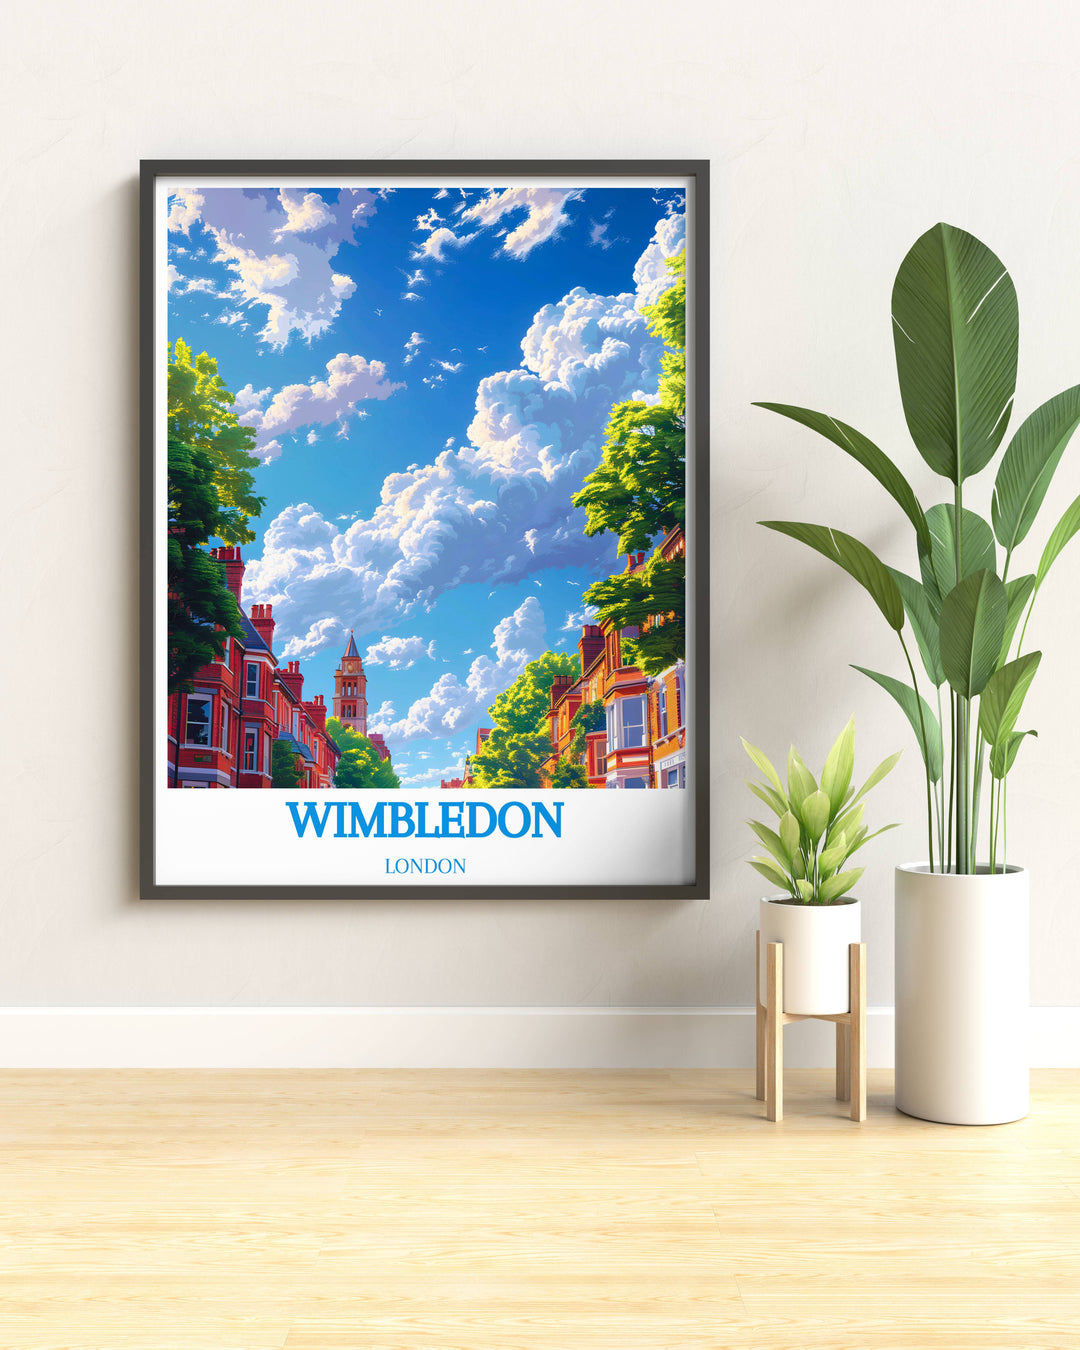 Captivating wall art of Wimbledon Common in Southwest London, highlighting the rich textures and serene landscapes of this beloved park.